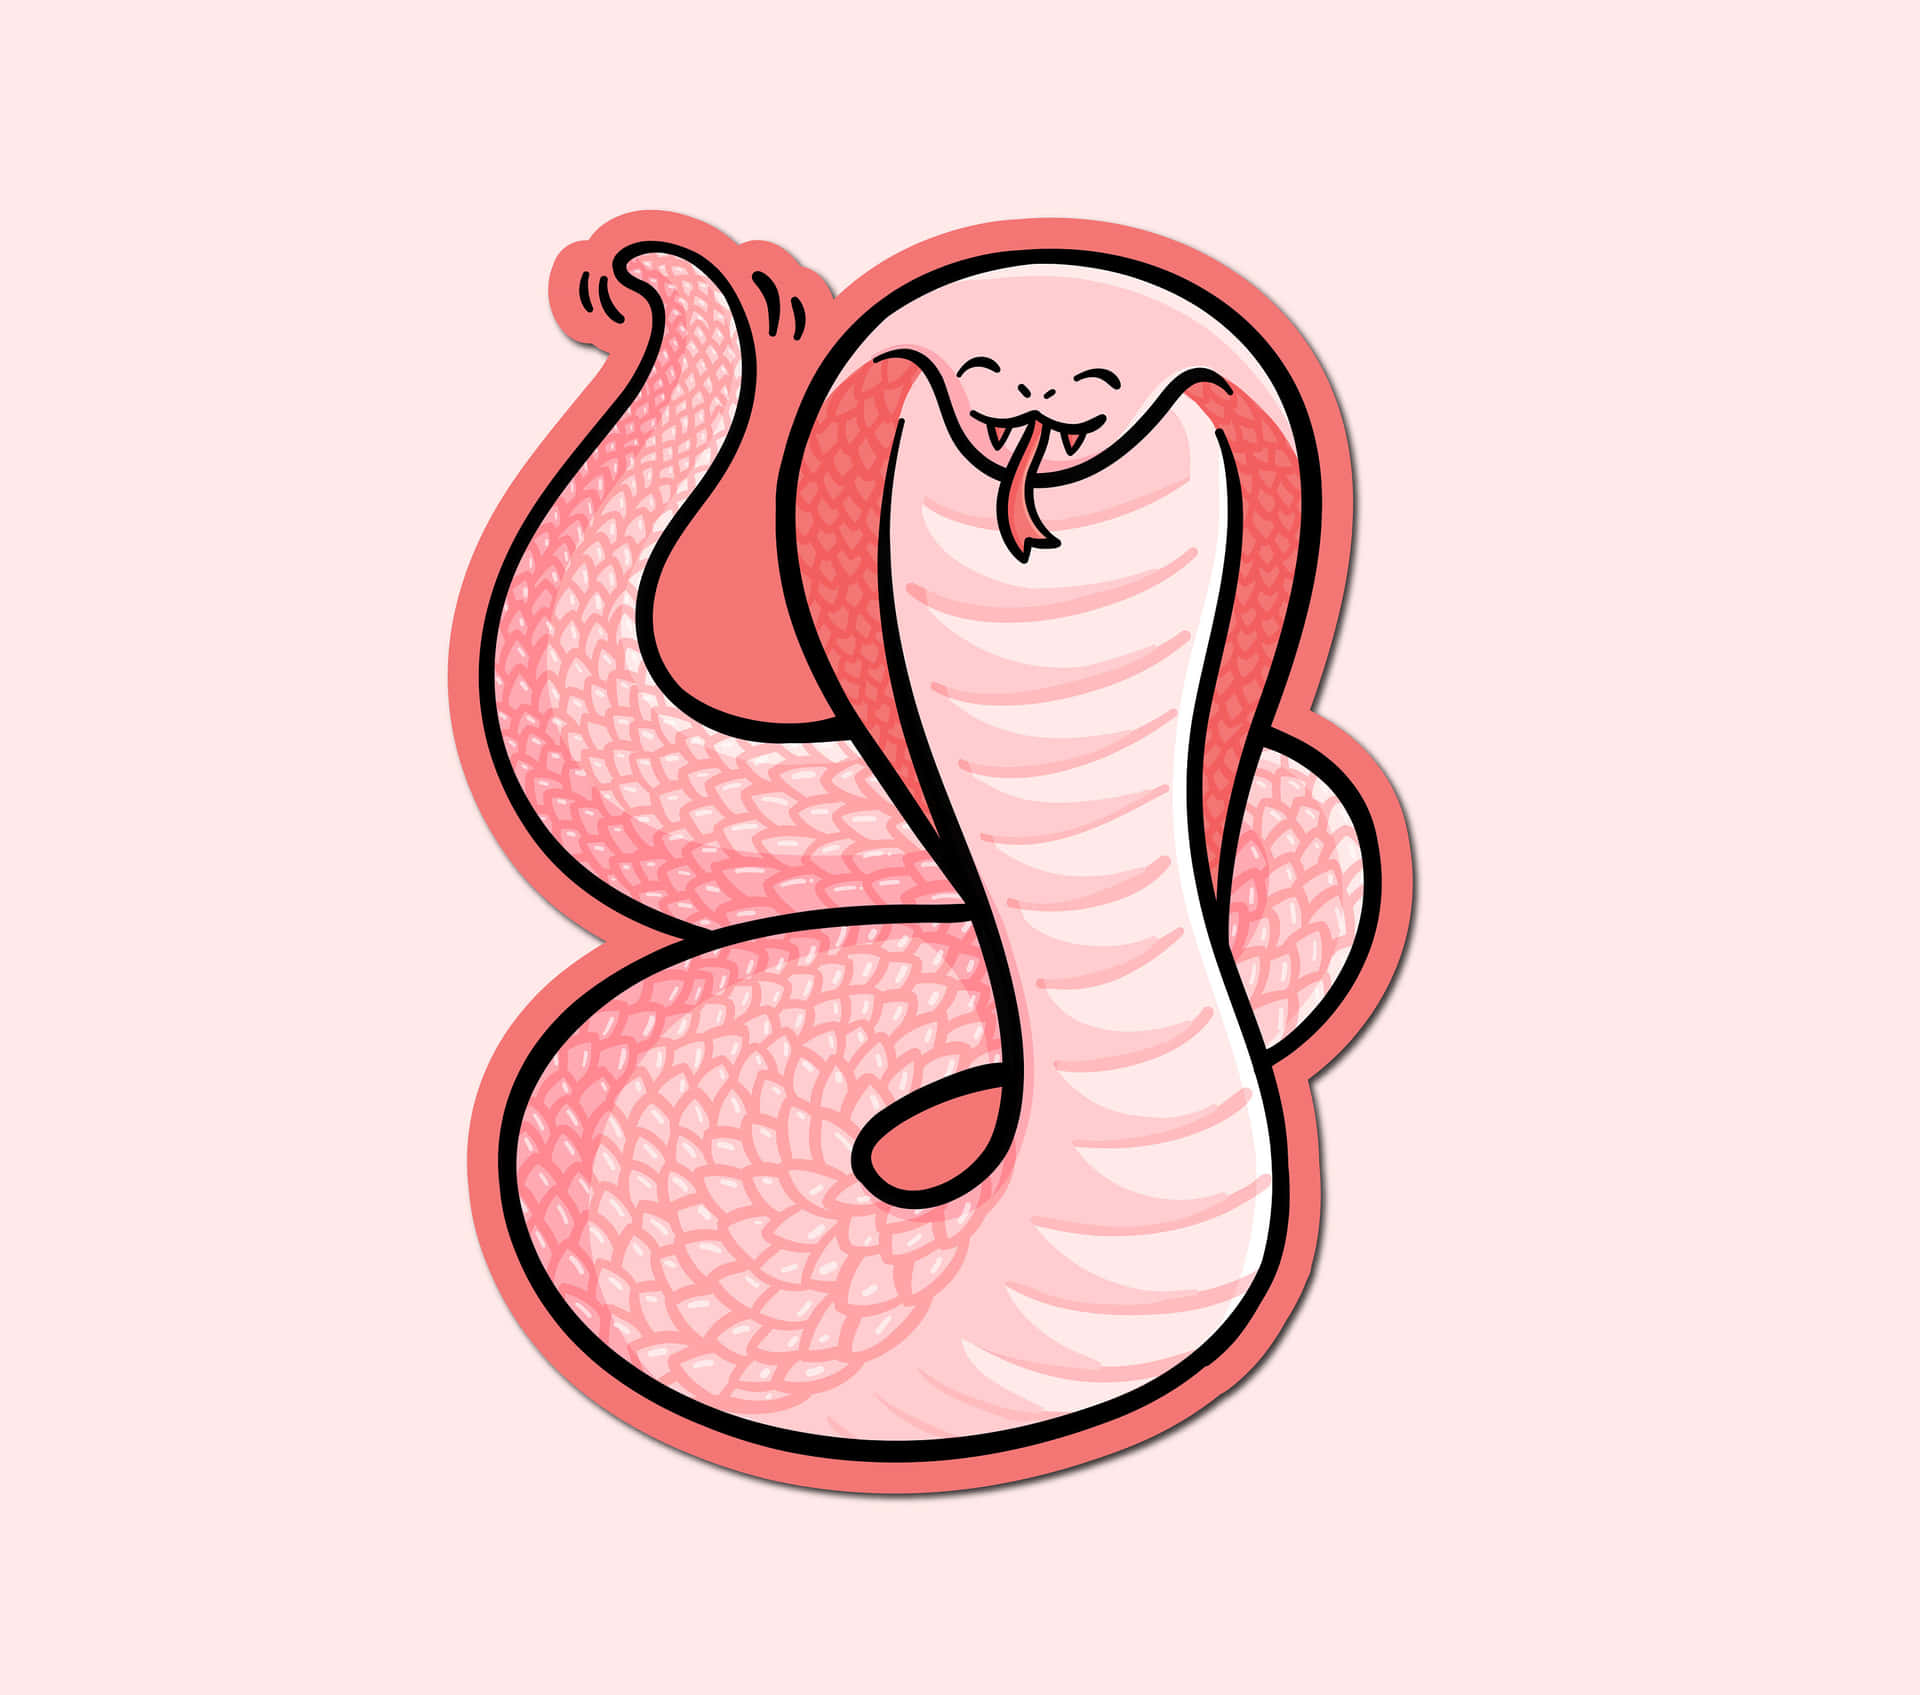 Come and explore the wonderful world of Cute Snakes!"